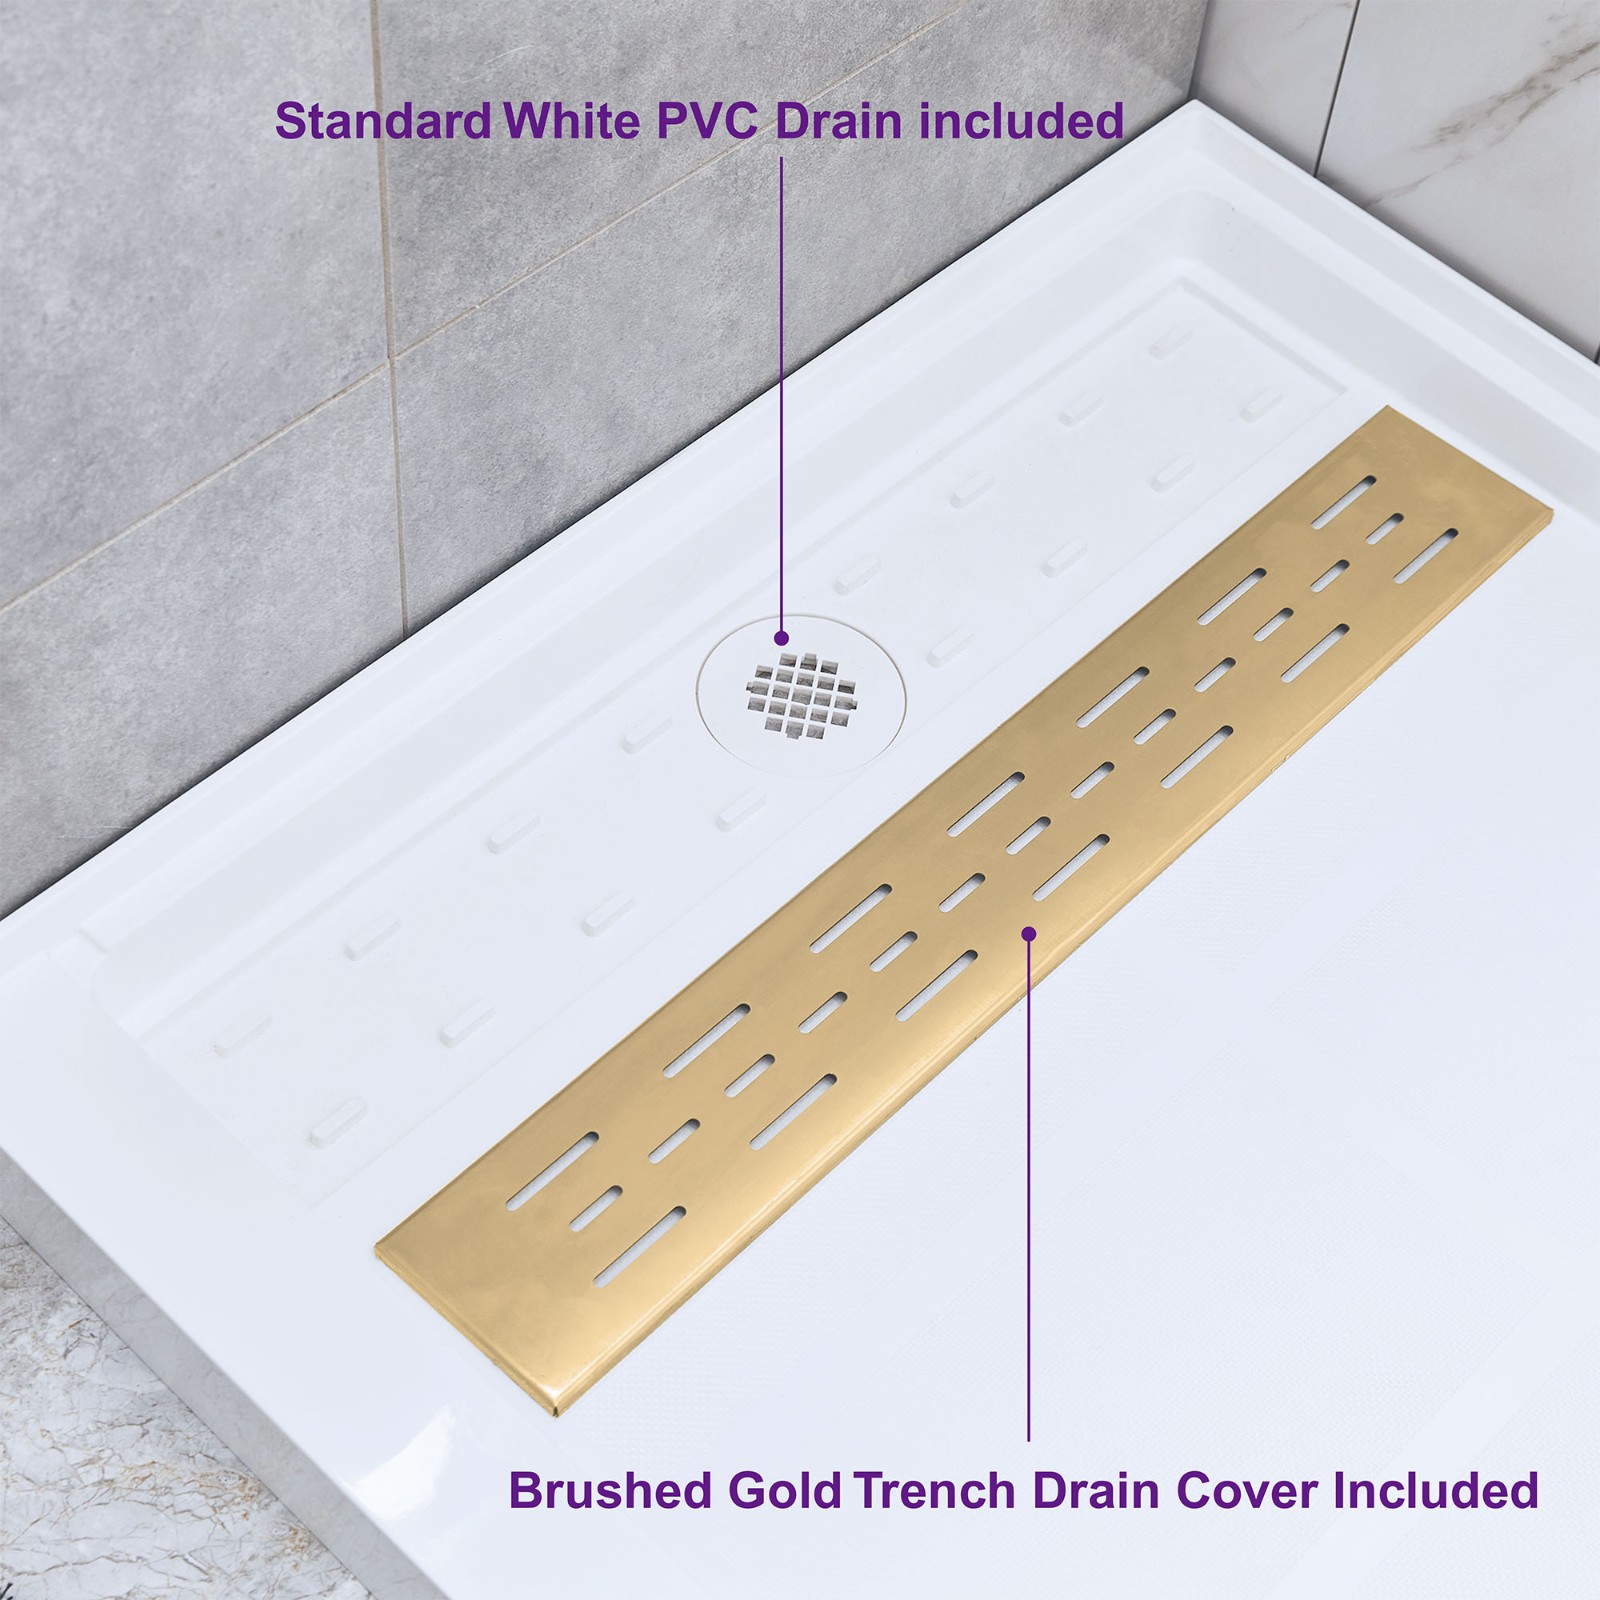  WOODBRIDGE SBR6030-1000R-BG SolidSurface Shower Base with Recessed Trench Side Including Brushed Gold Linear Cover, 60